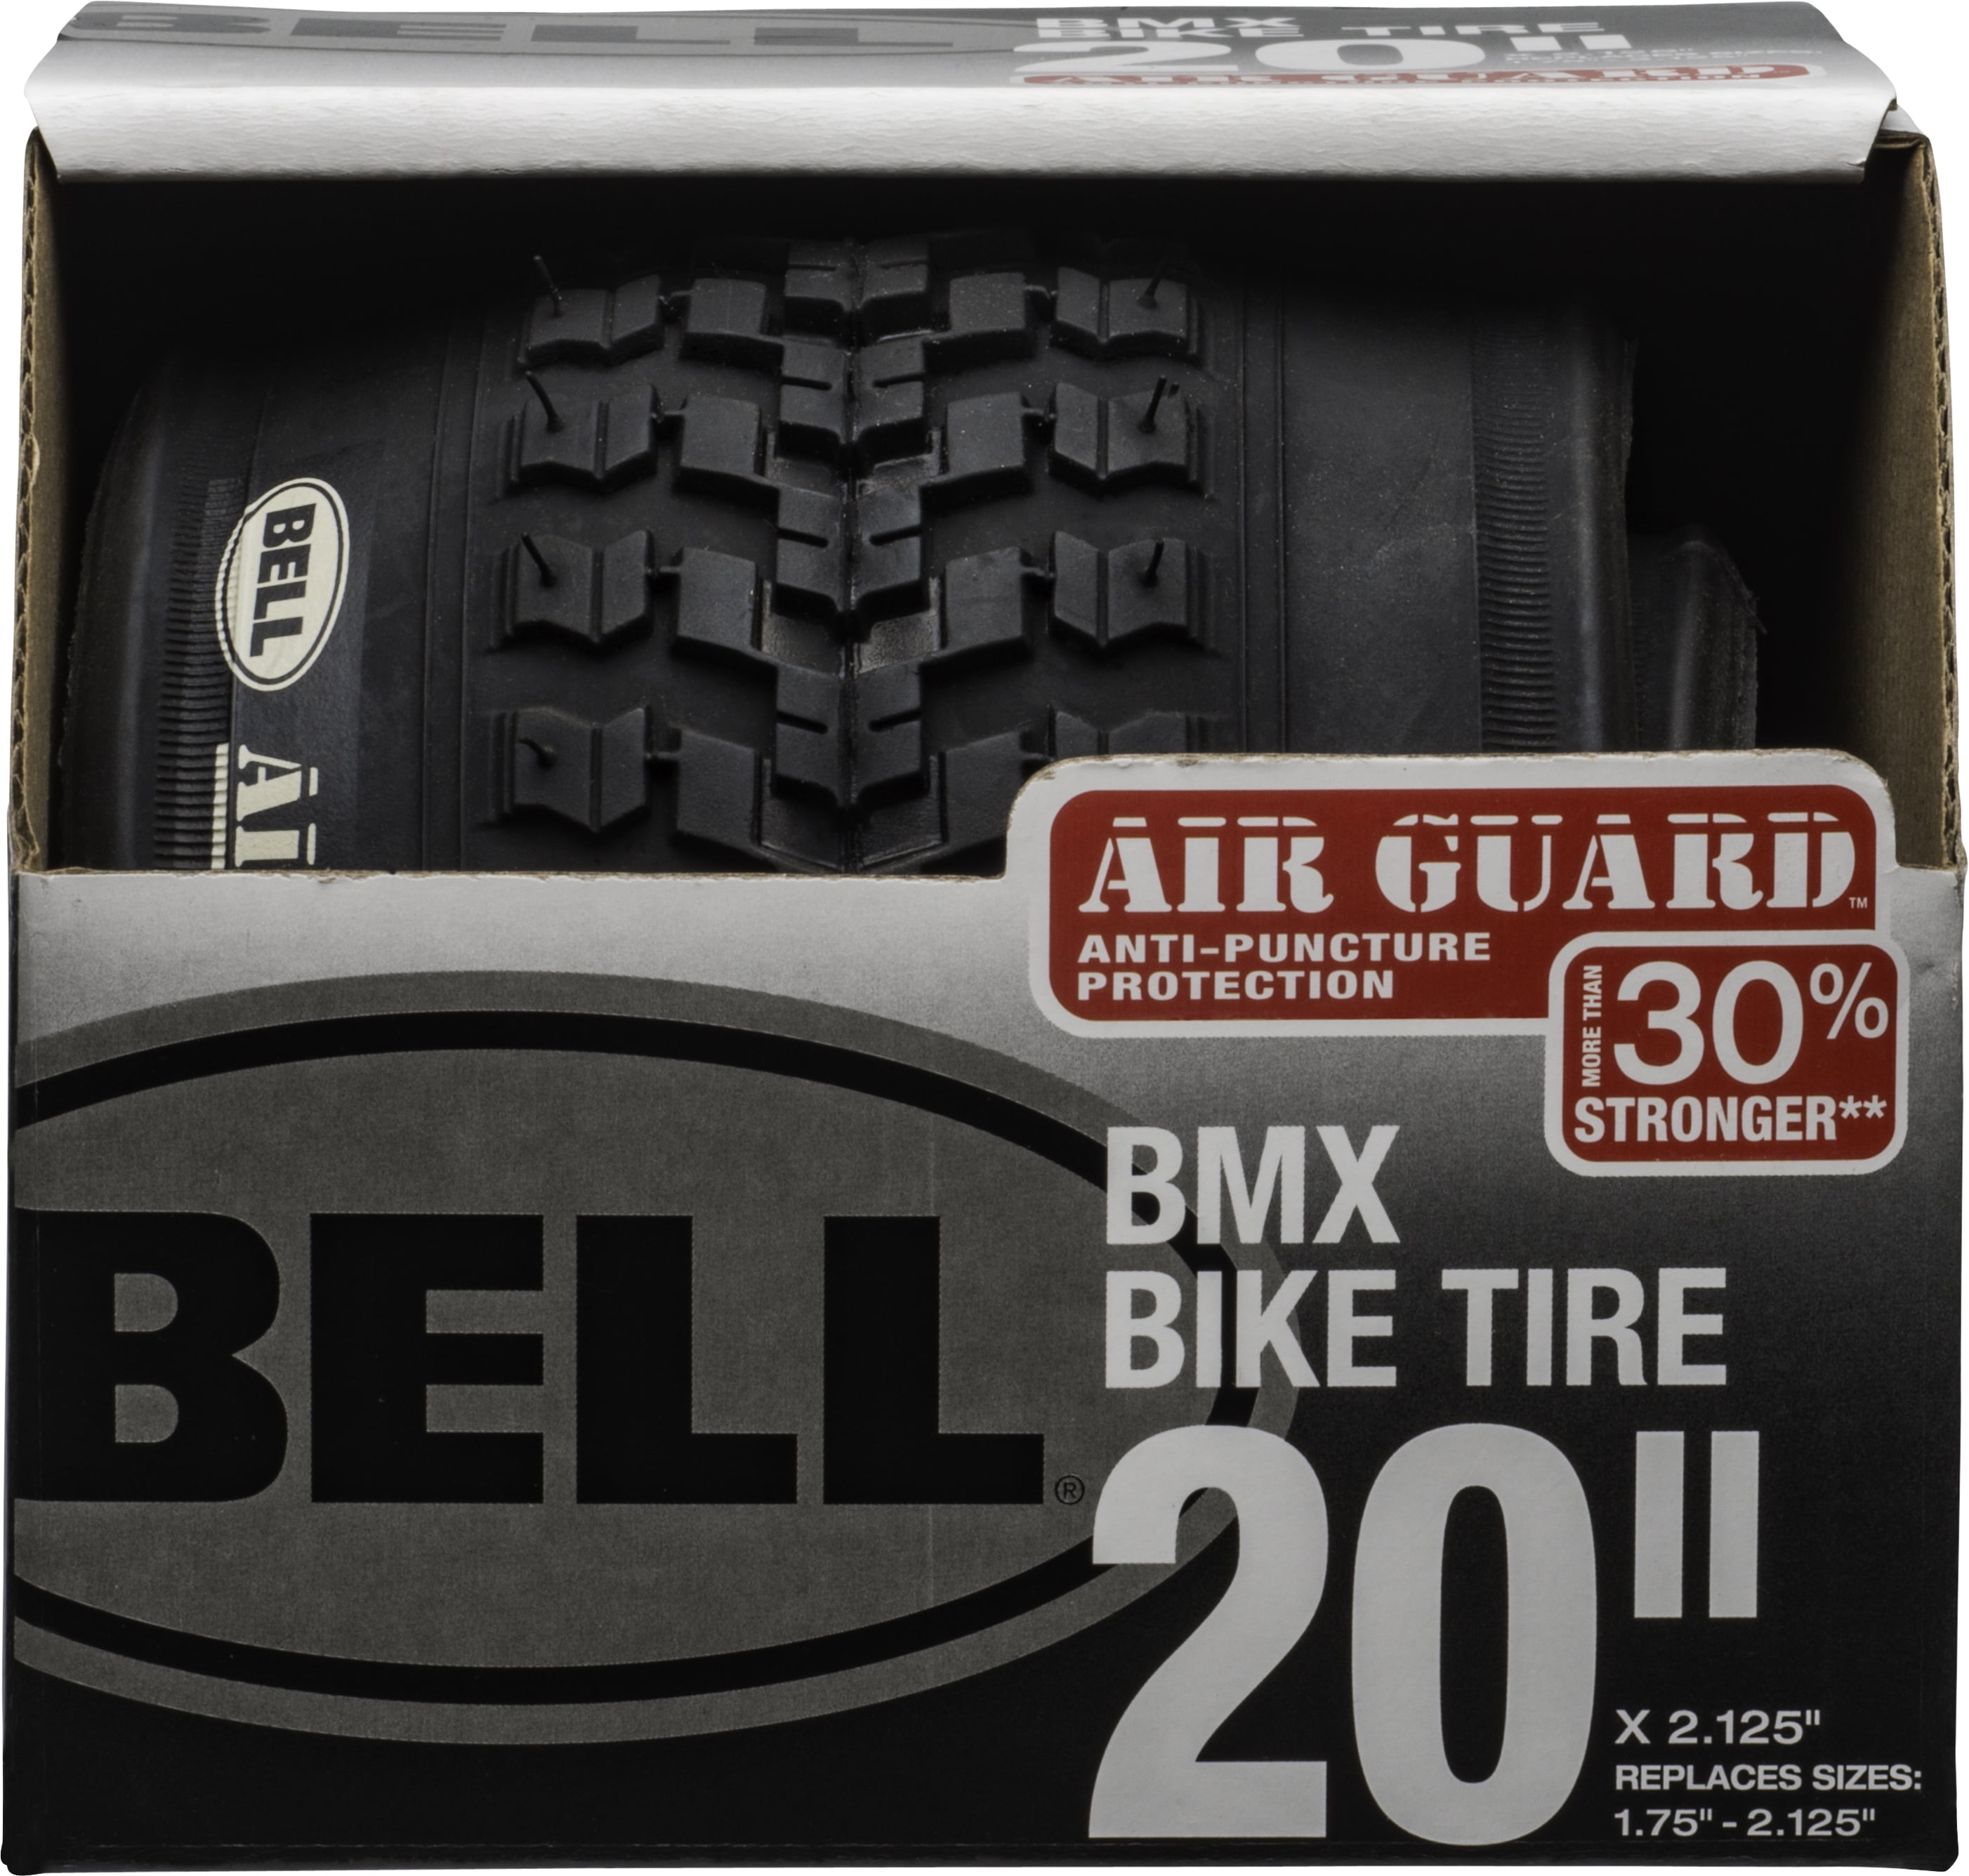 7115510 for sale online 20 In Black x 1.75-2.25 In. Bell Air Guard Freestyle BMX Bike Tire 